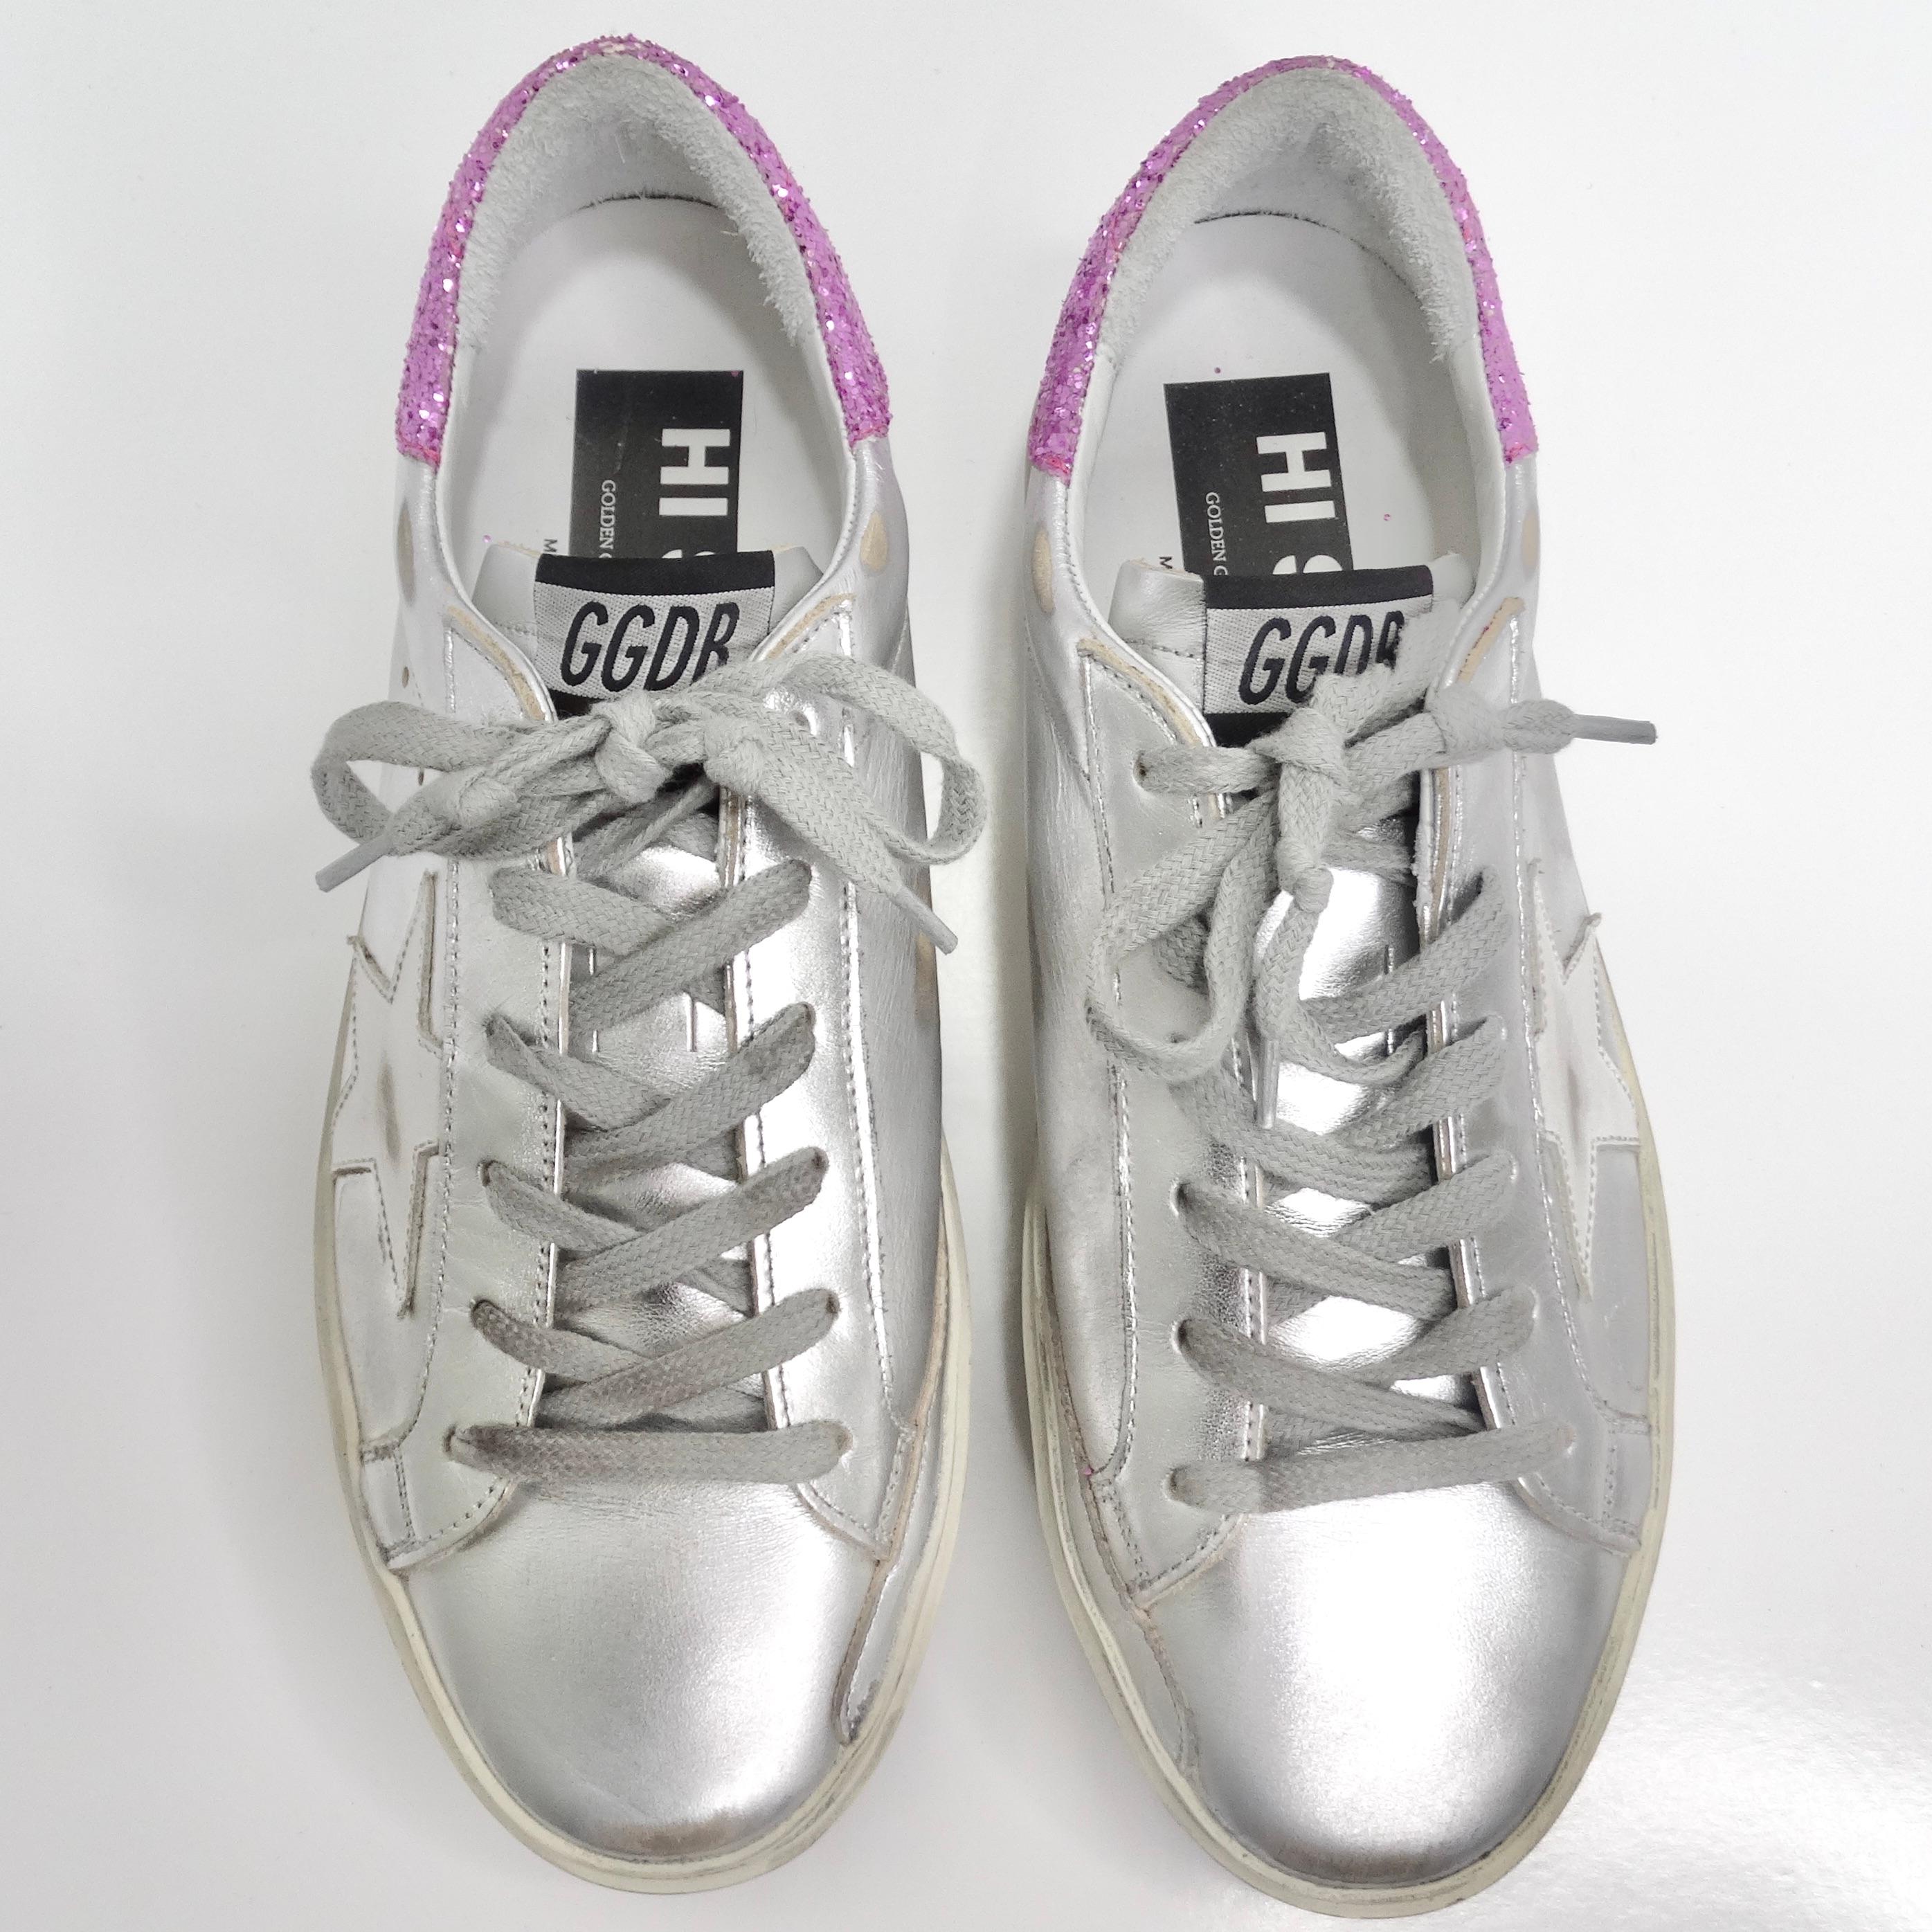 Introducing the epitome of urban glamour, the Golden Goose Silver/Pink Leather And Glitter Superstar Low Top Sneakers. Elevate your style with these metallic silver low top sneakers that effortlessly embody the signature Golden Goose distressed